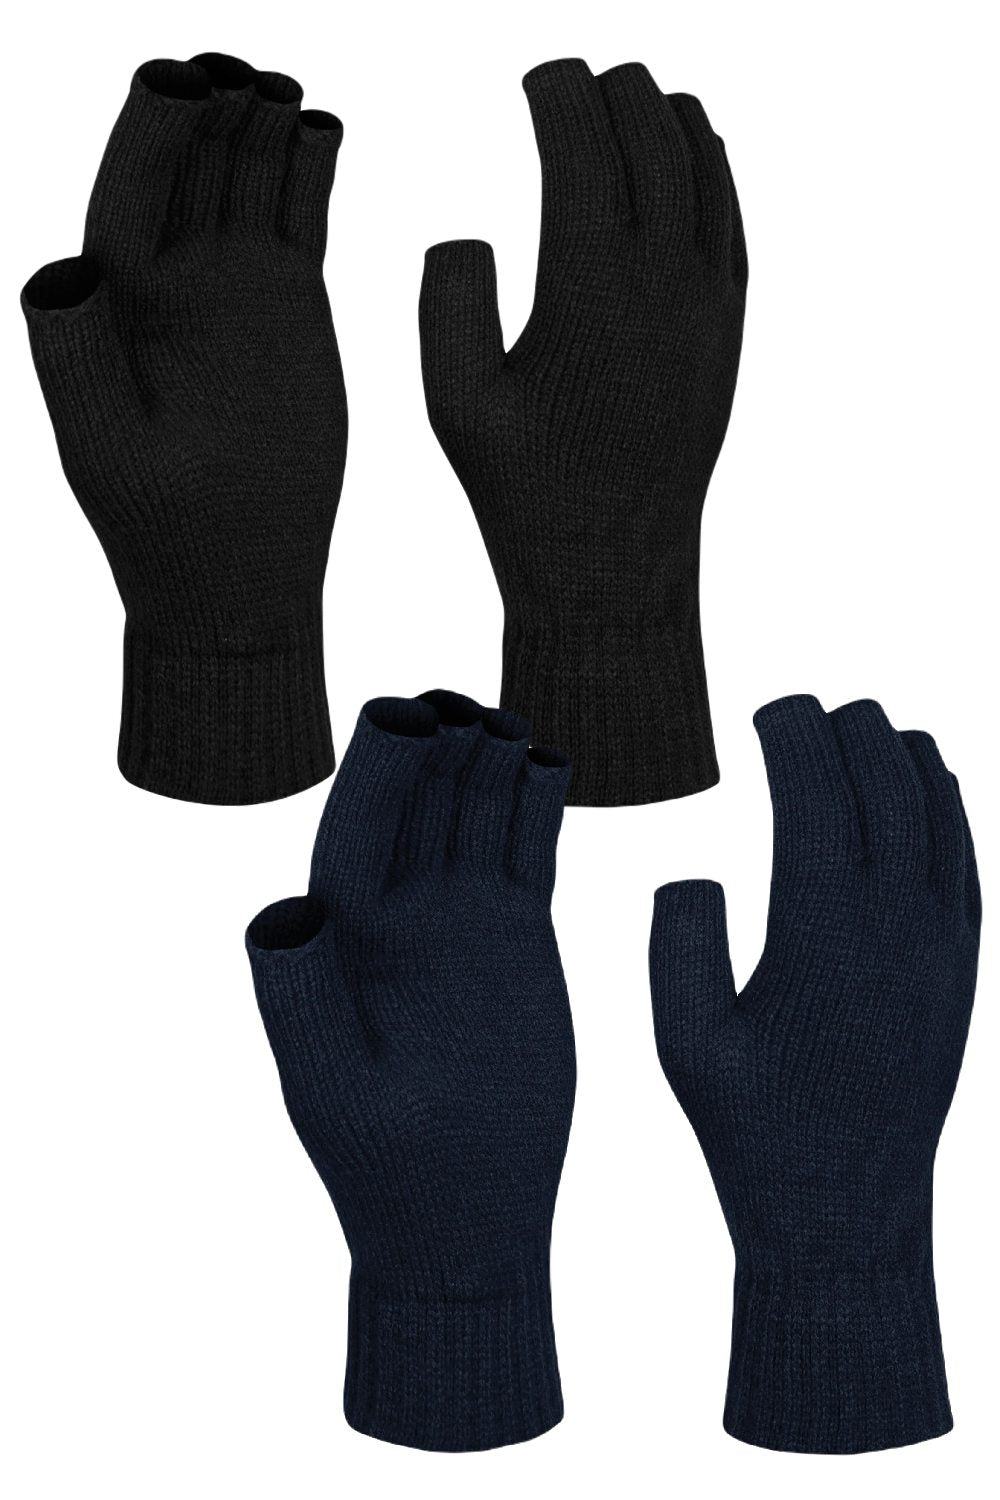 Regatta Thermal Fingerless Mitts in Black and Navy